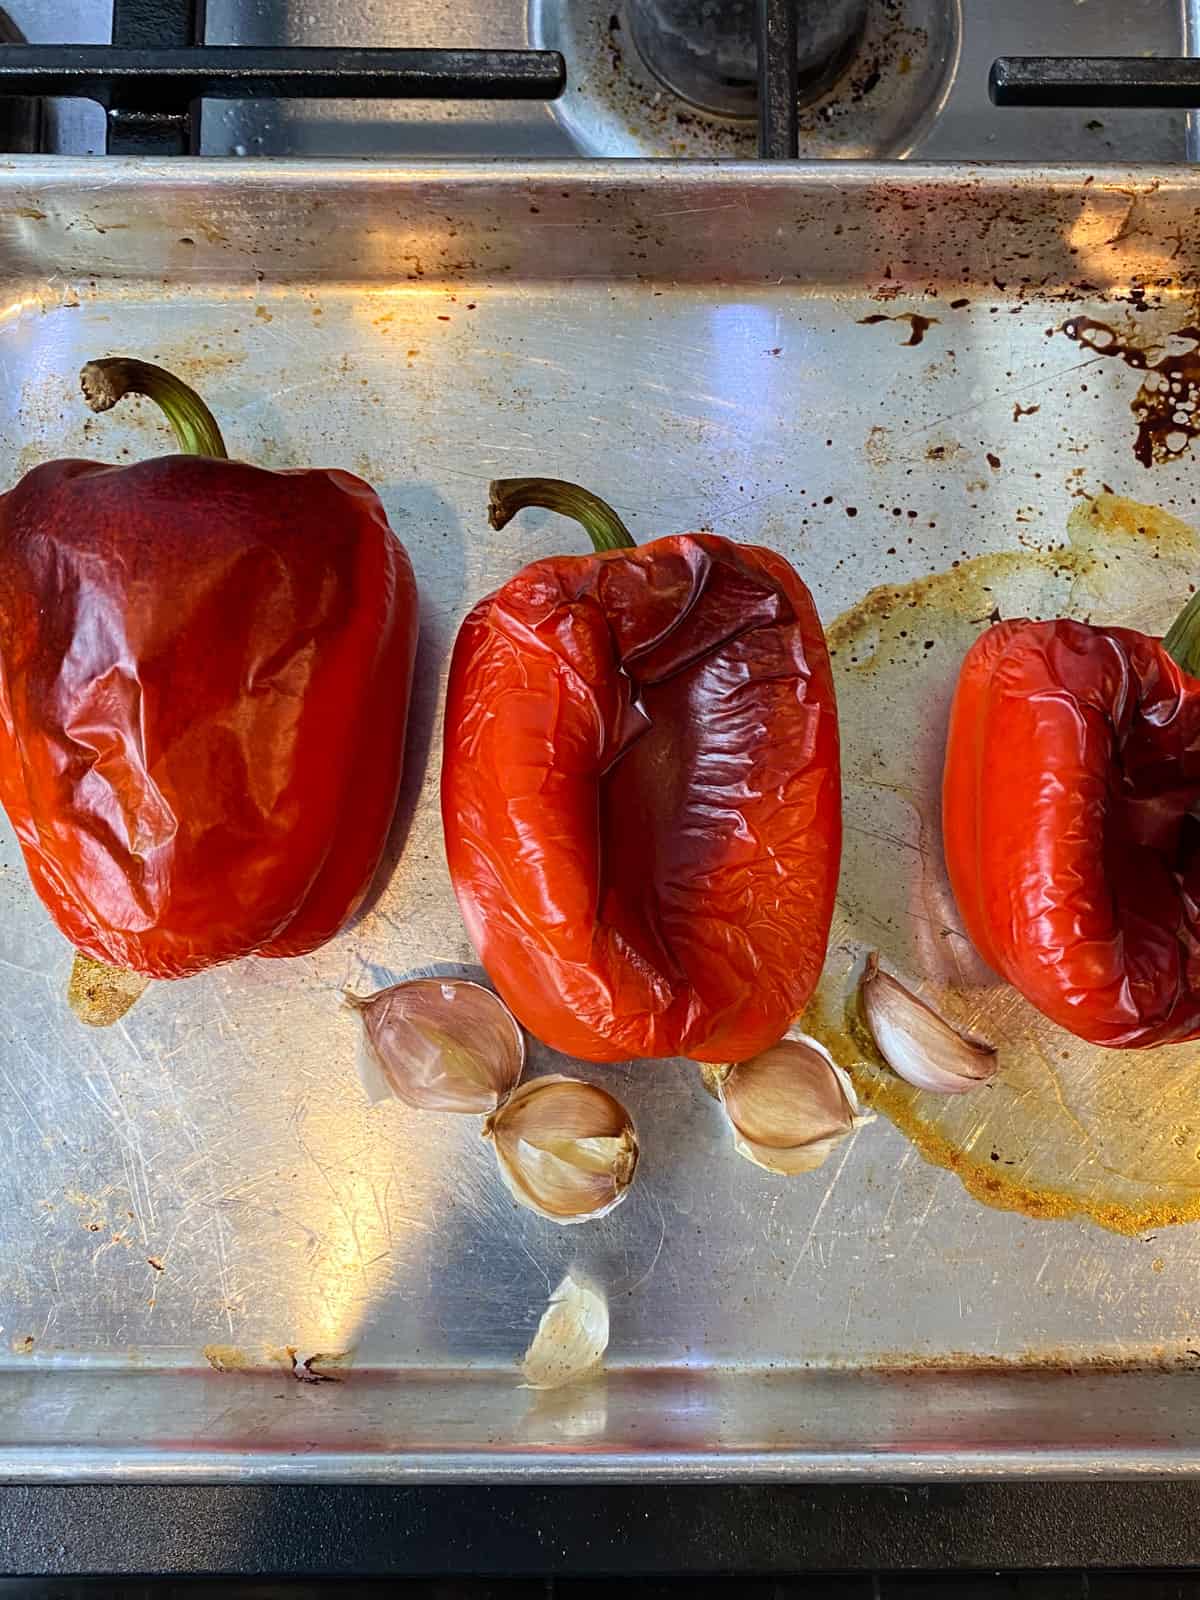 Roast the red peppers and garlic until the outside os charred and peppers are tender.